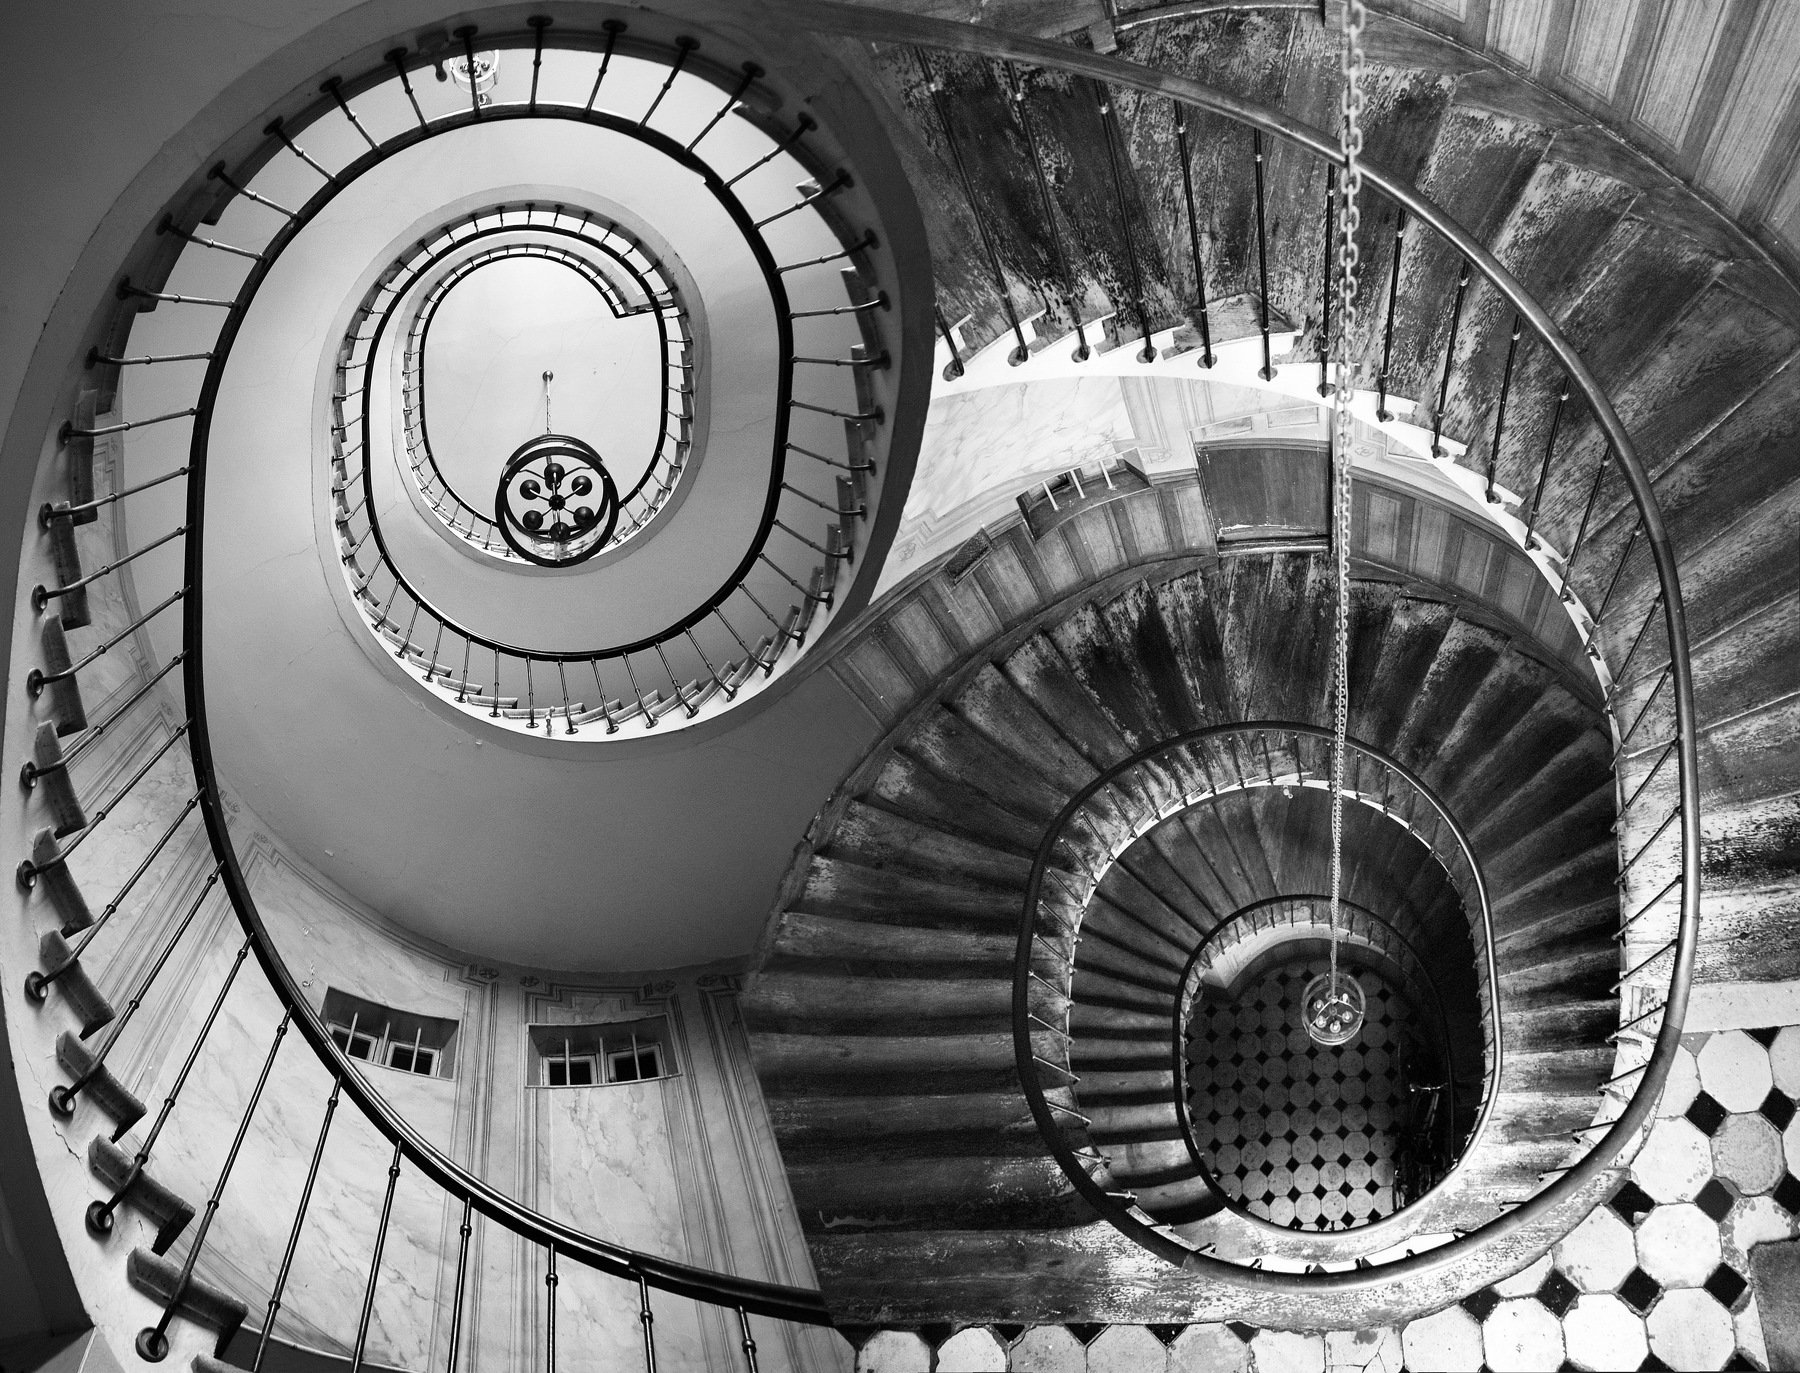 staicase, architecture, spiral, interion, depth, geomery, france, paris, abstract, surreal, collage, Endegor